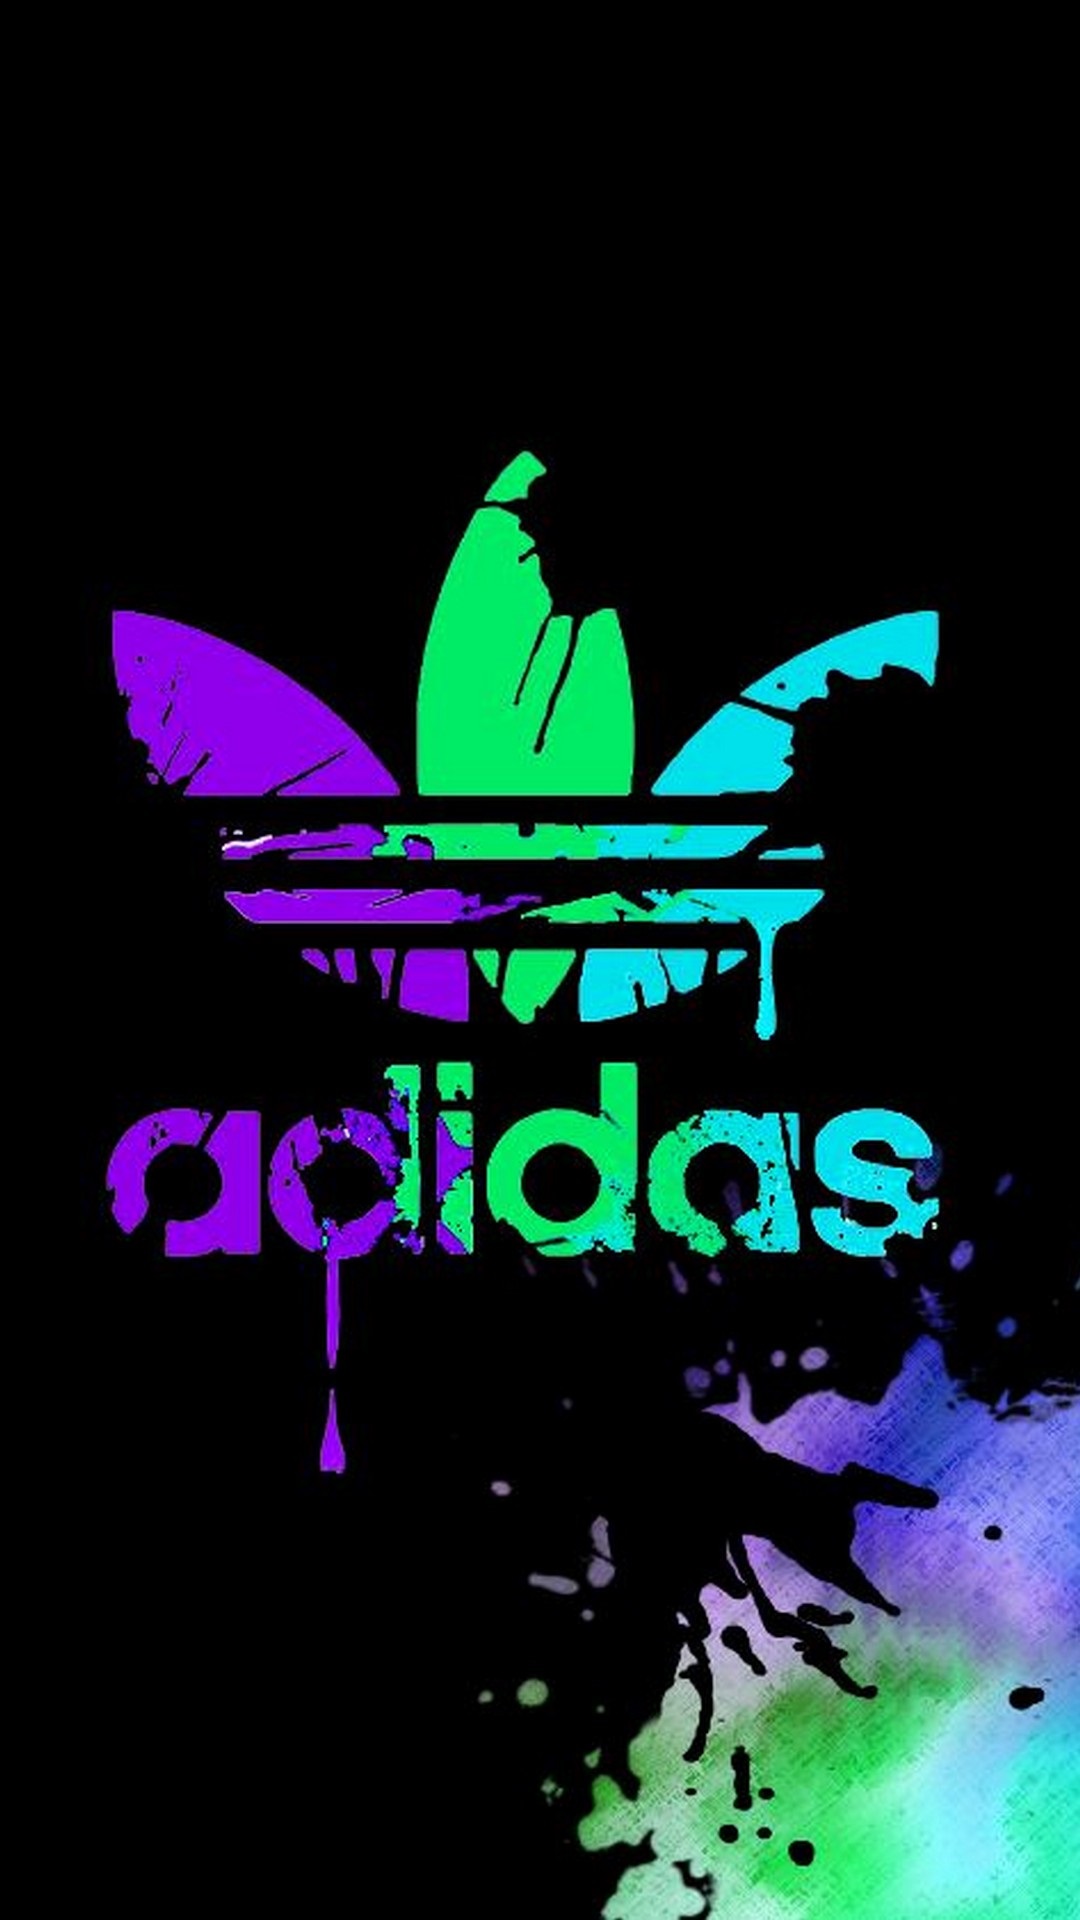 adidas background for iphone